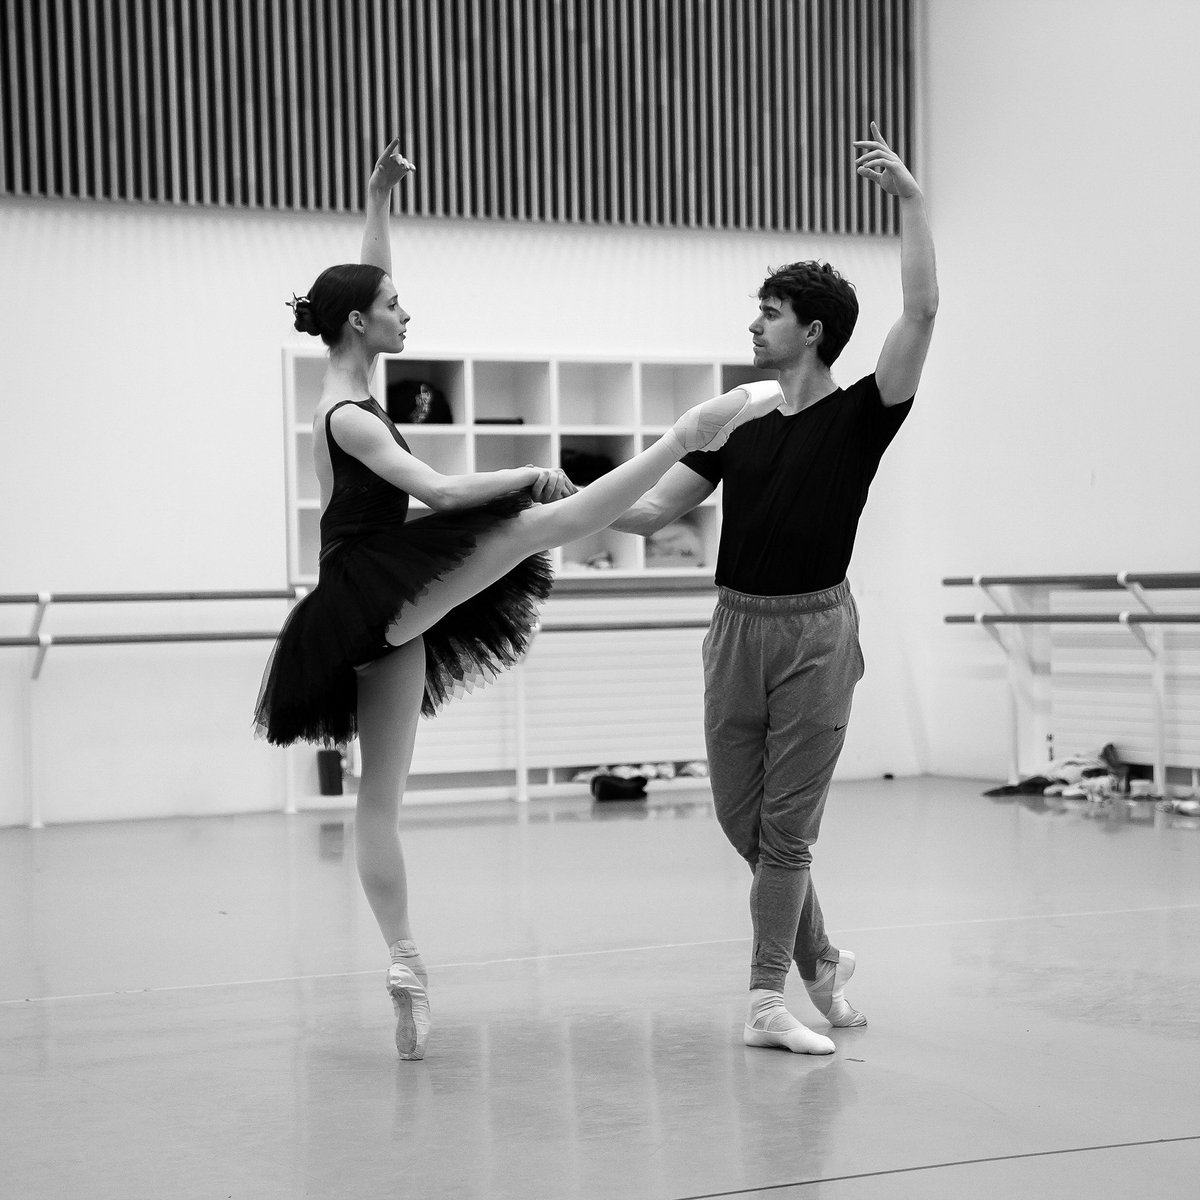 What a breathtaking pair 🤩 Behind-the-scenes with Aitor Arrieta and Emma Hawes rehearsing for Swan Lake in-the-round. We bring this production to @RoyalAlbertHall from 12 - 23 June! Tickets: ballet.org.uk/production/swa… 📸 Isabella Turolla